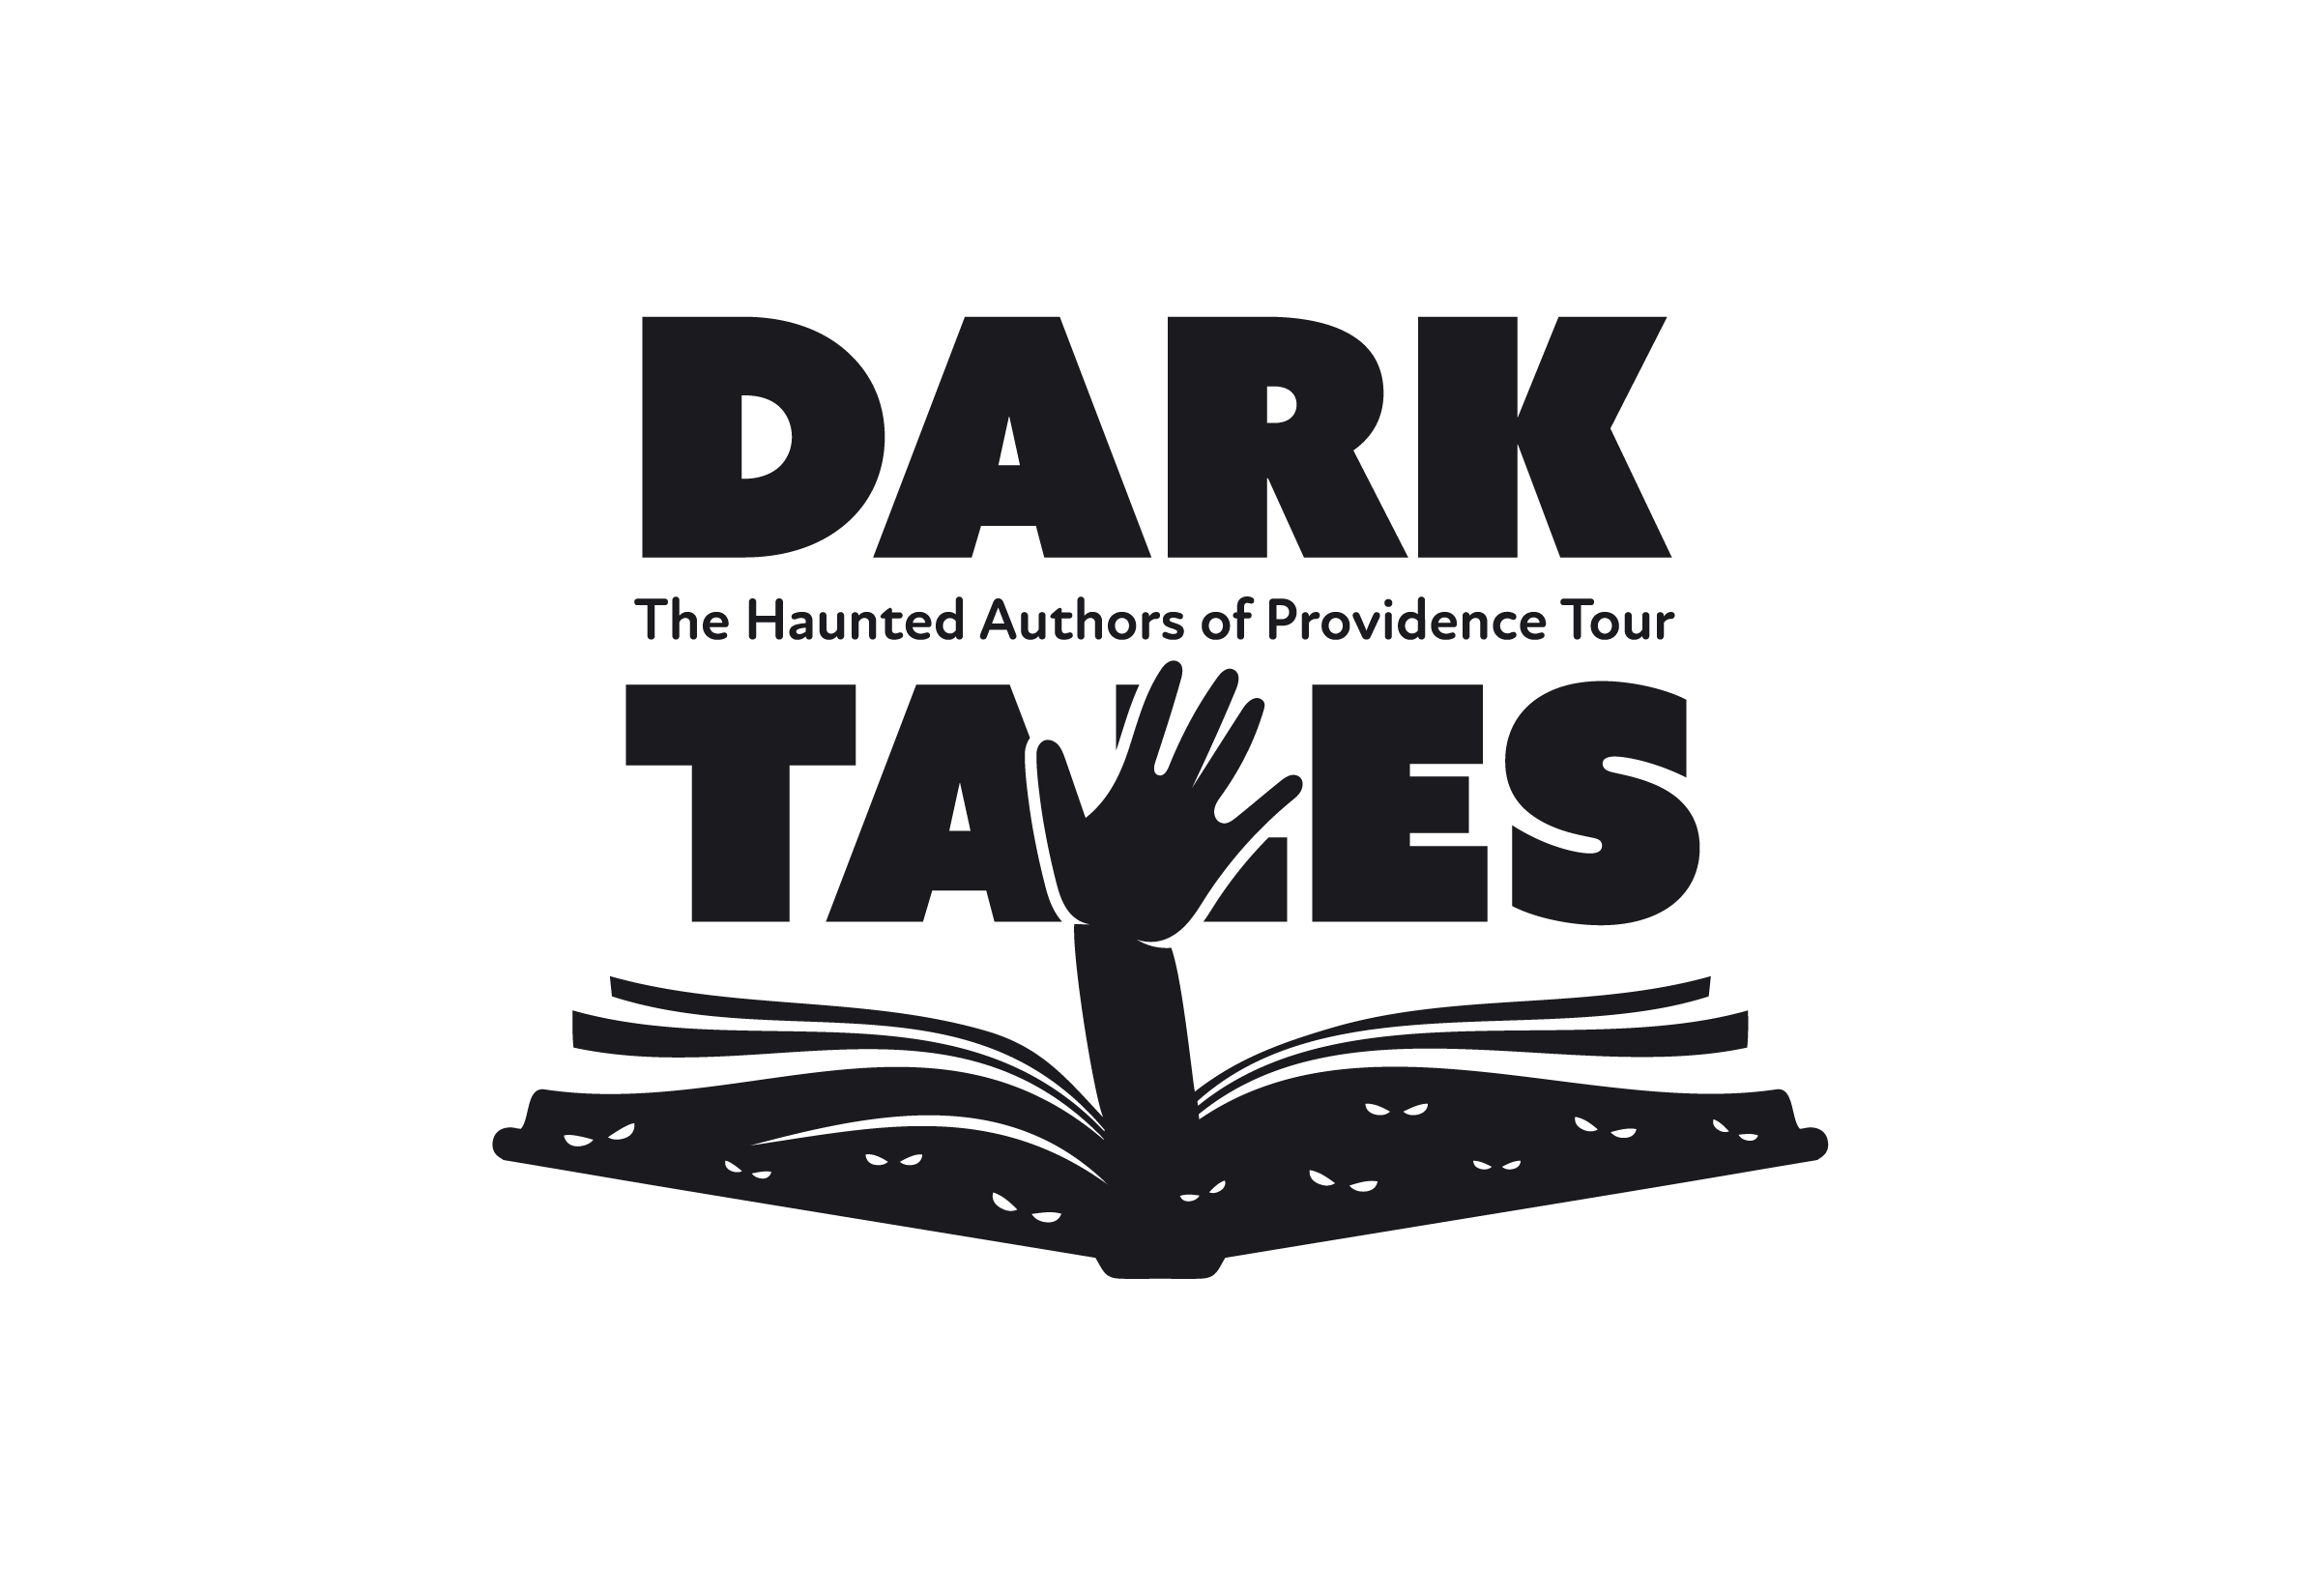 Dark tales: haunted authors of providence tour [logo]